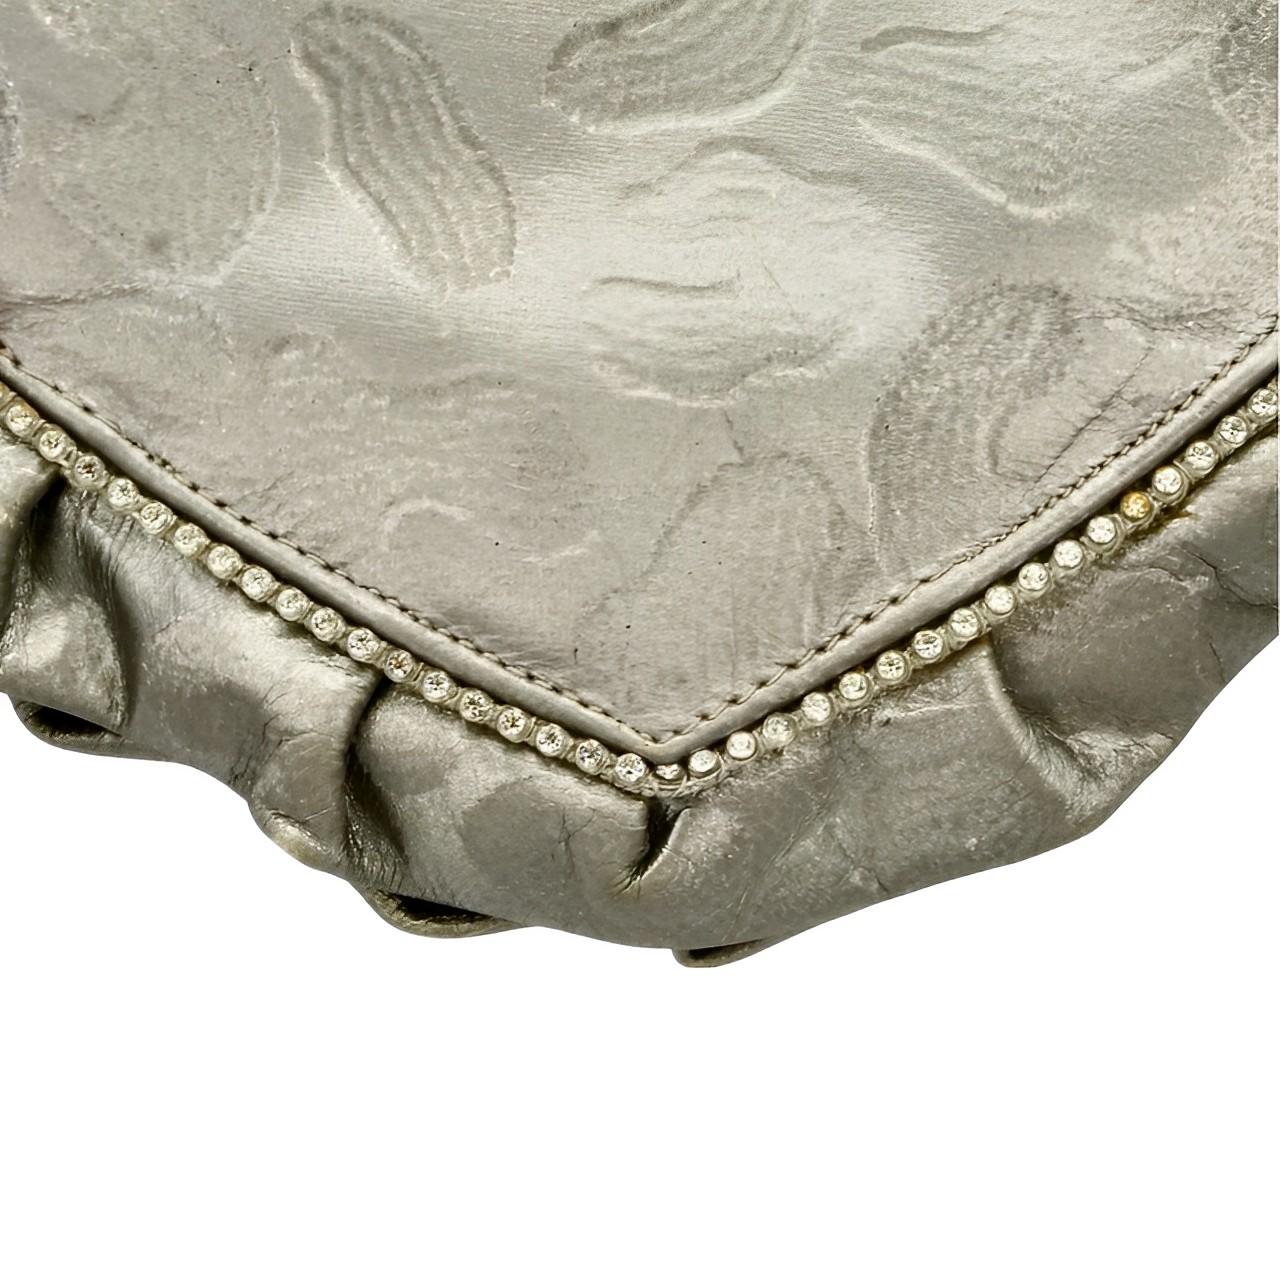 Stylish Stuart Weitzman silver grey leather shoulder bag with clear rhinestone highlights, and a magnetic clasp. Measuring width 19.5cm / 7.6 inches, height 19 cm / 7.48 inches, and with a strap drop of 52 cm / 20.4 inches. Inside there is a black